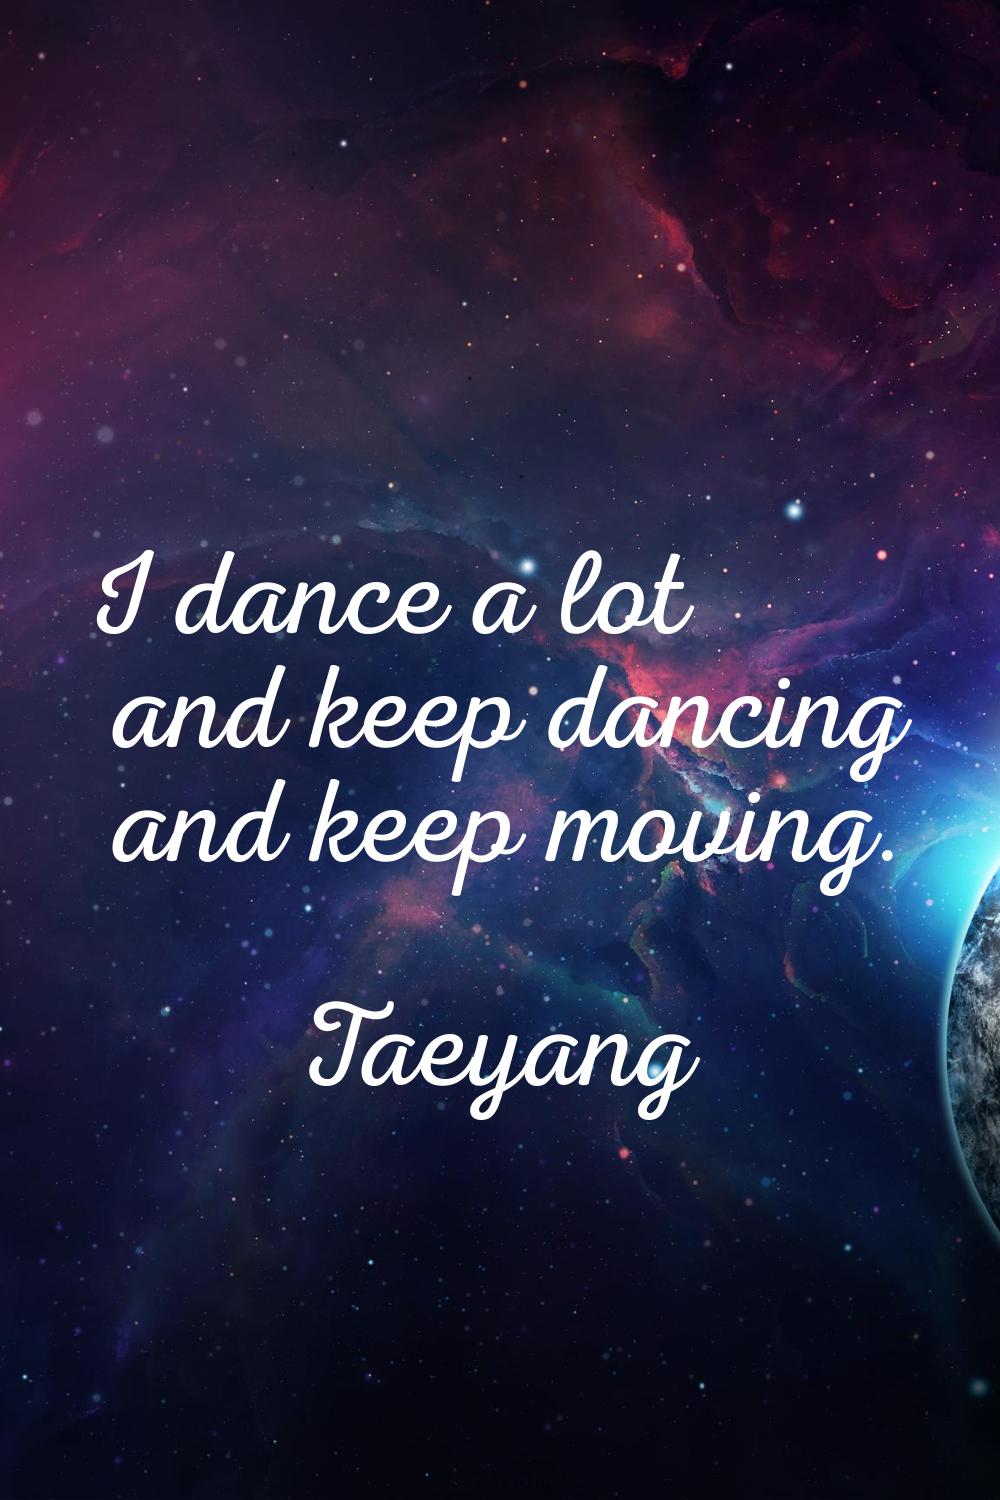 I dance a lot and keep dancing and keep moving.